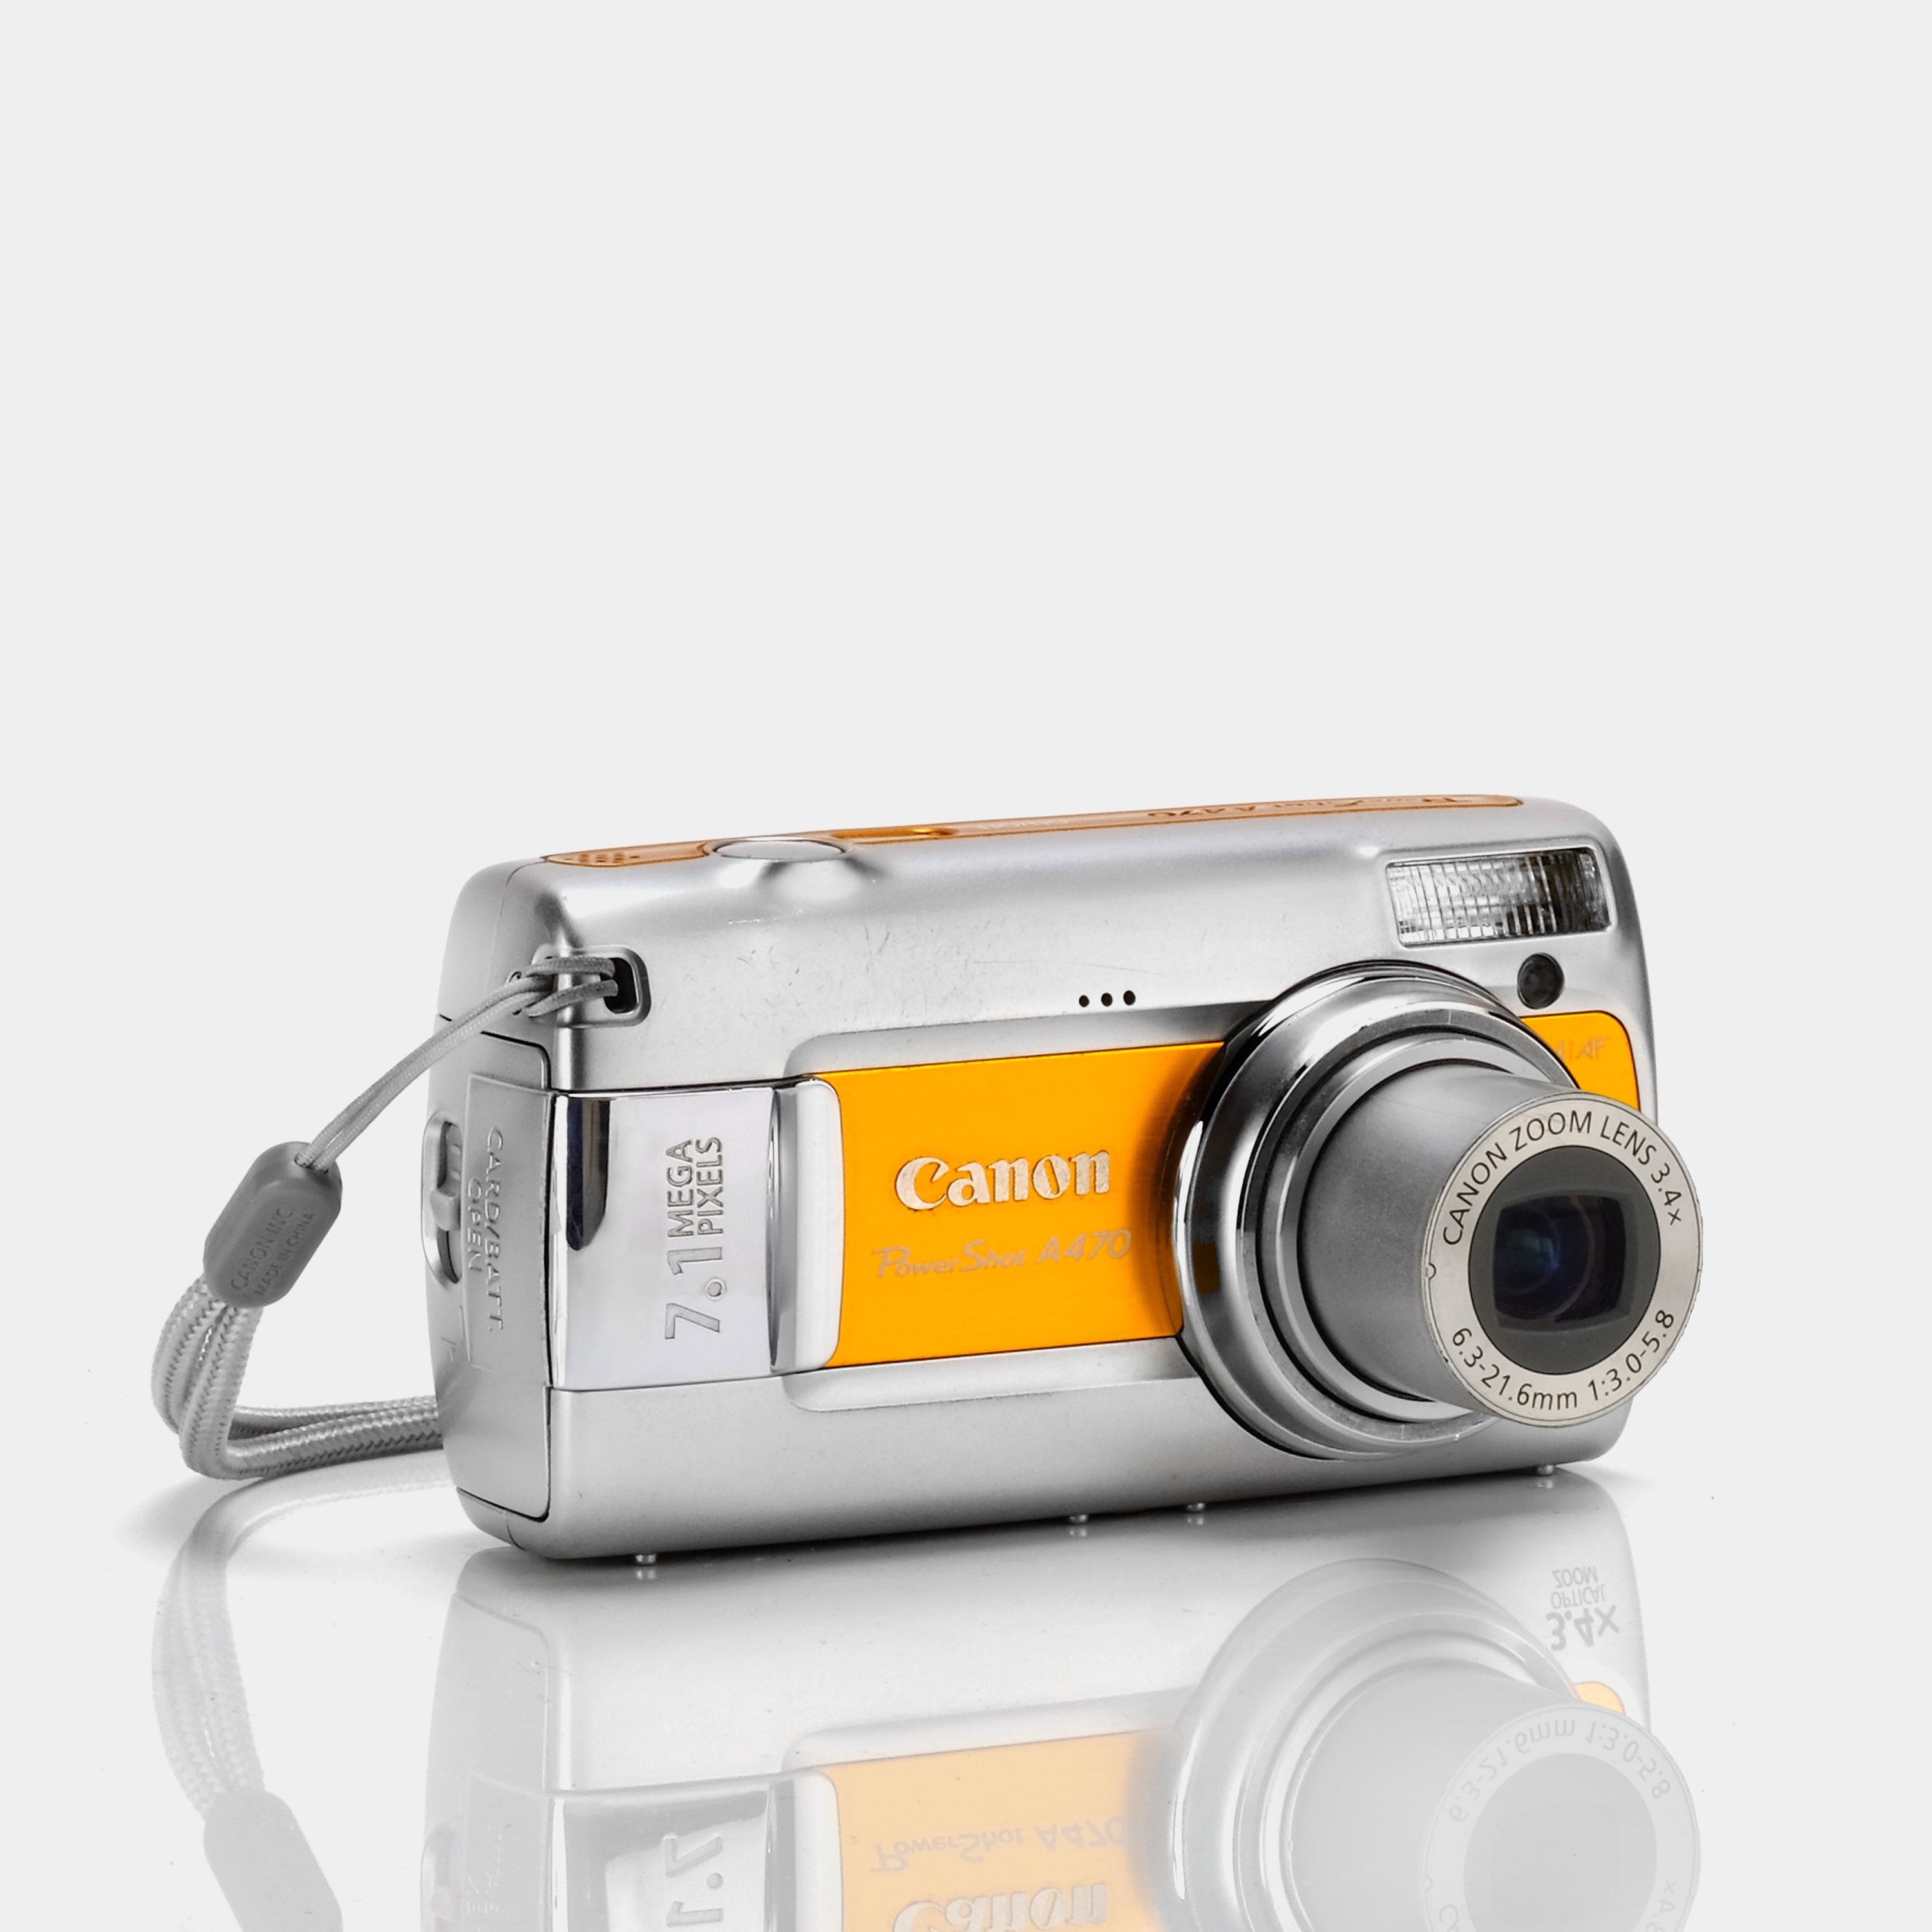 Canon PowerShot A470 Point and Shoot Digital Camera